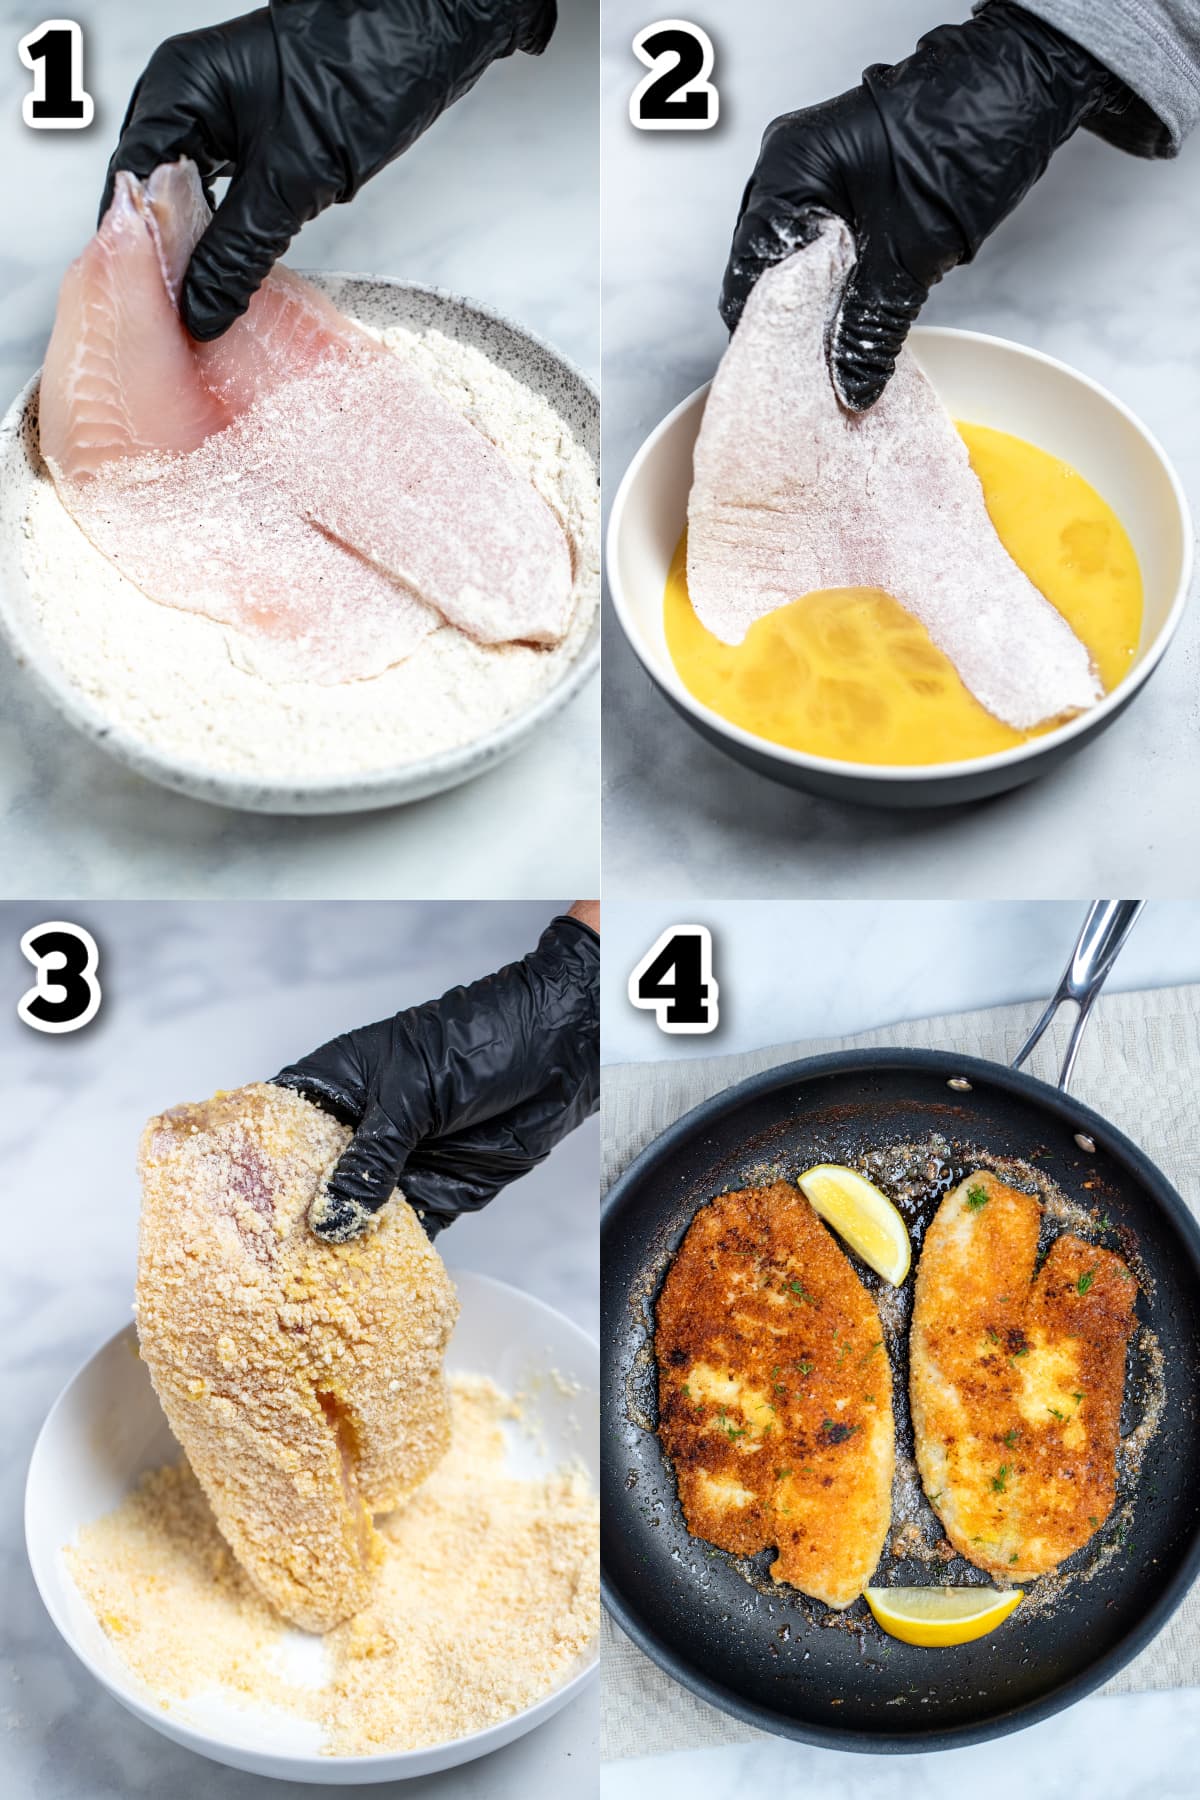 Step by step photos for how to make parmesan crusted tilapia.